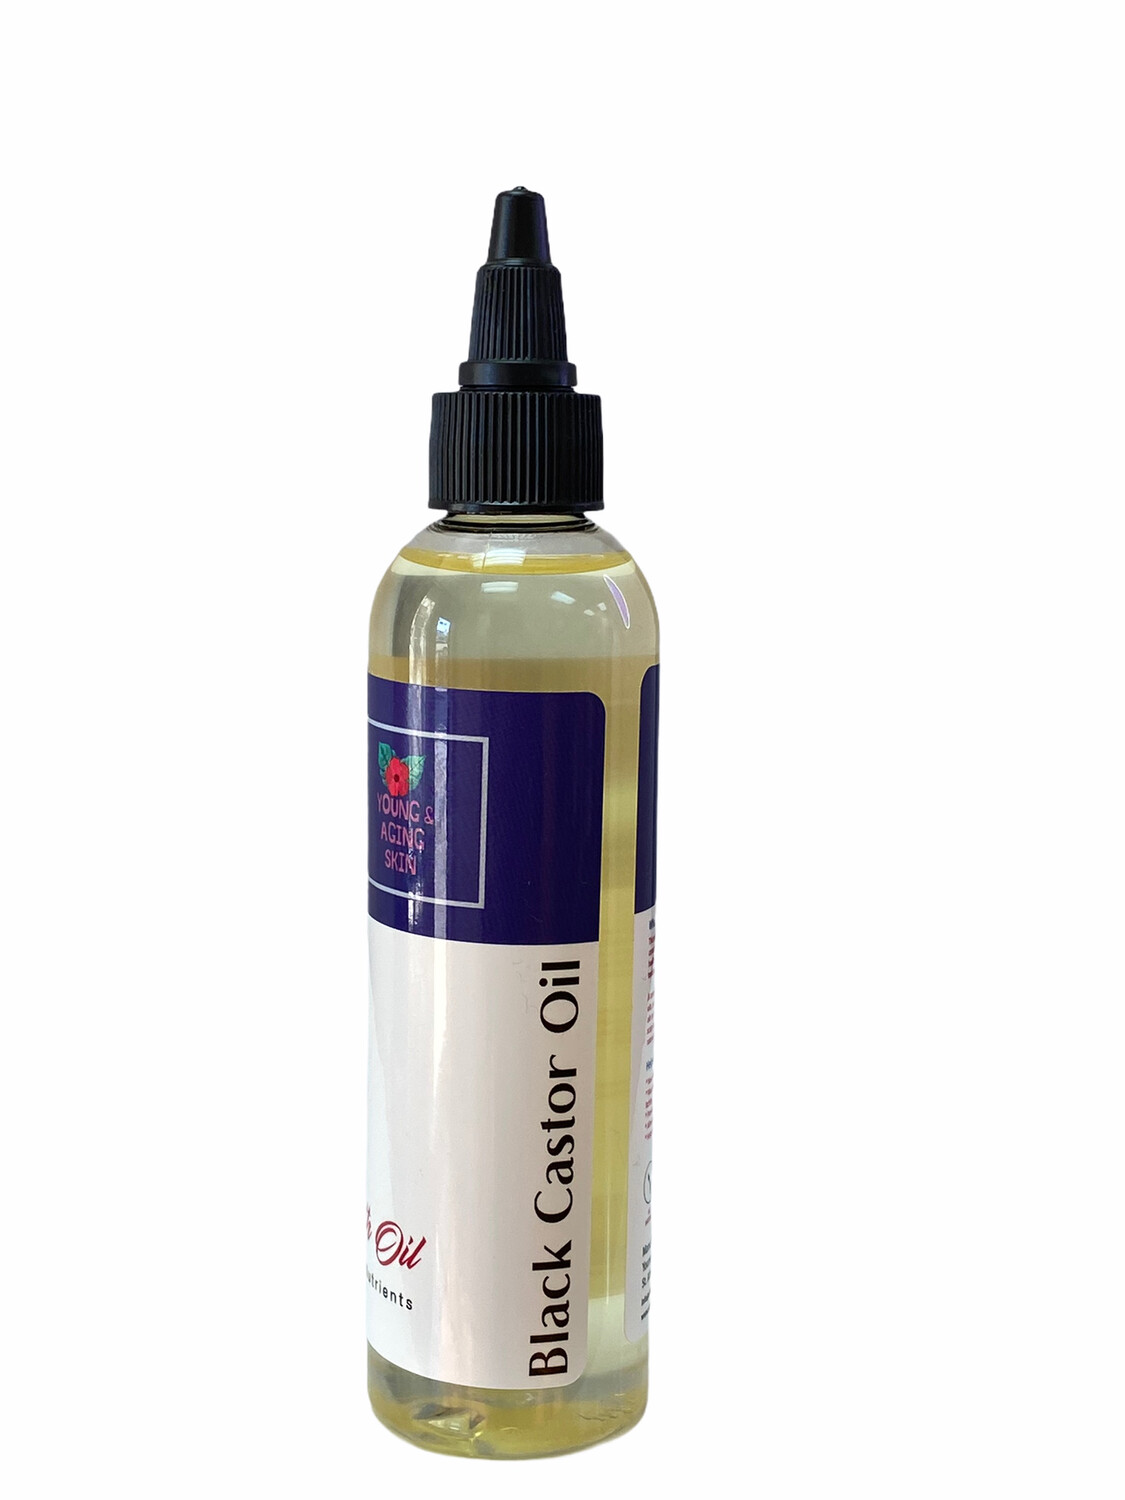 HAIR OIL with Black Castor & More